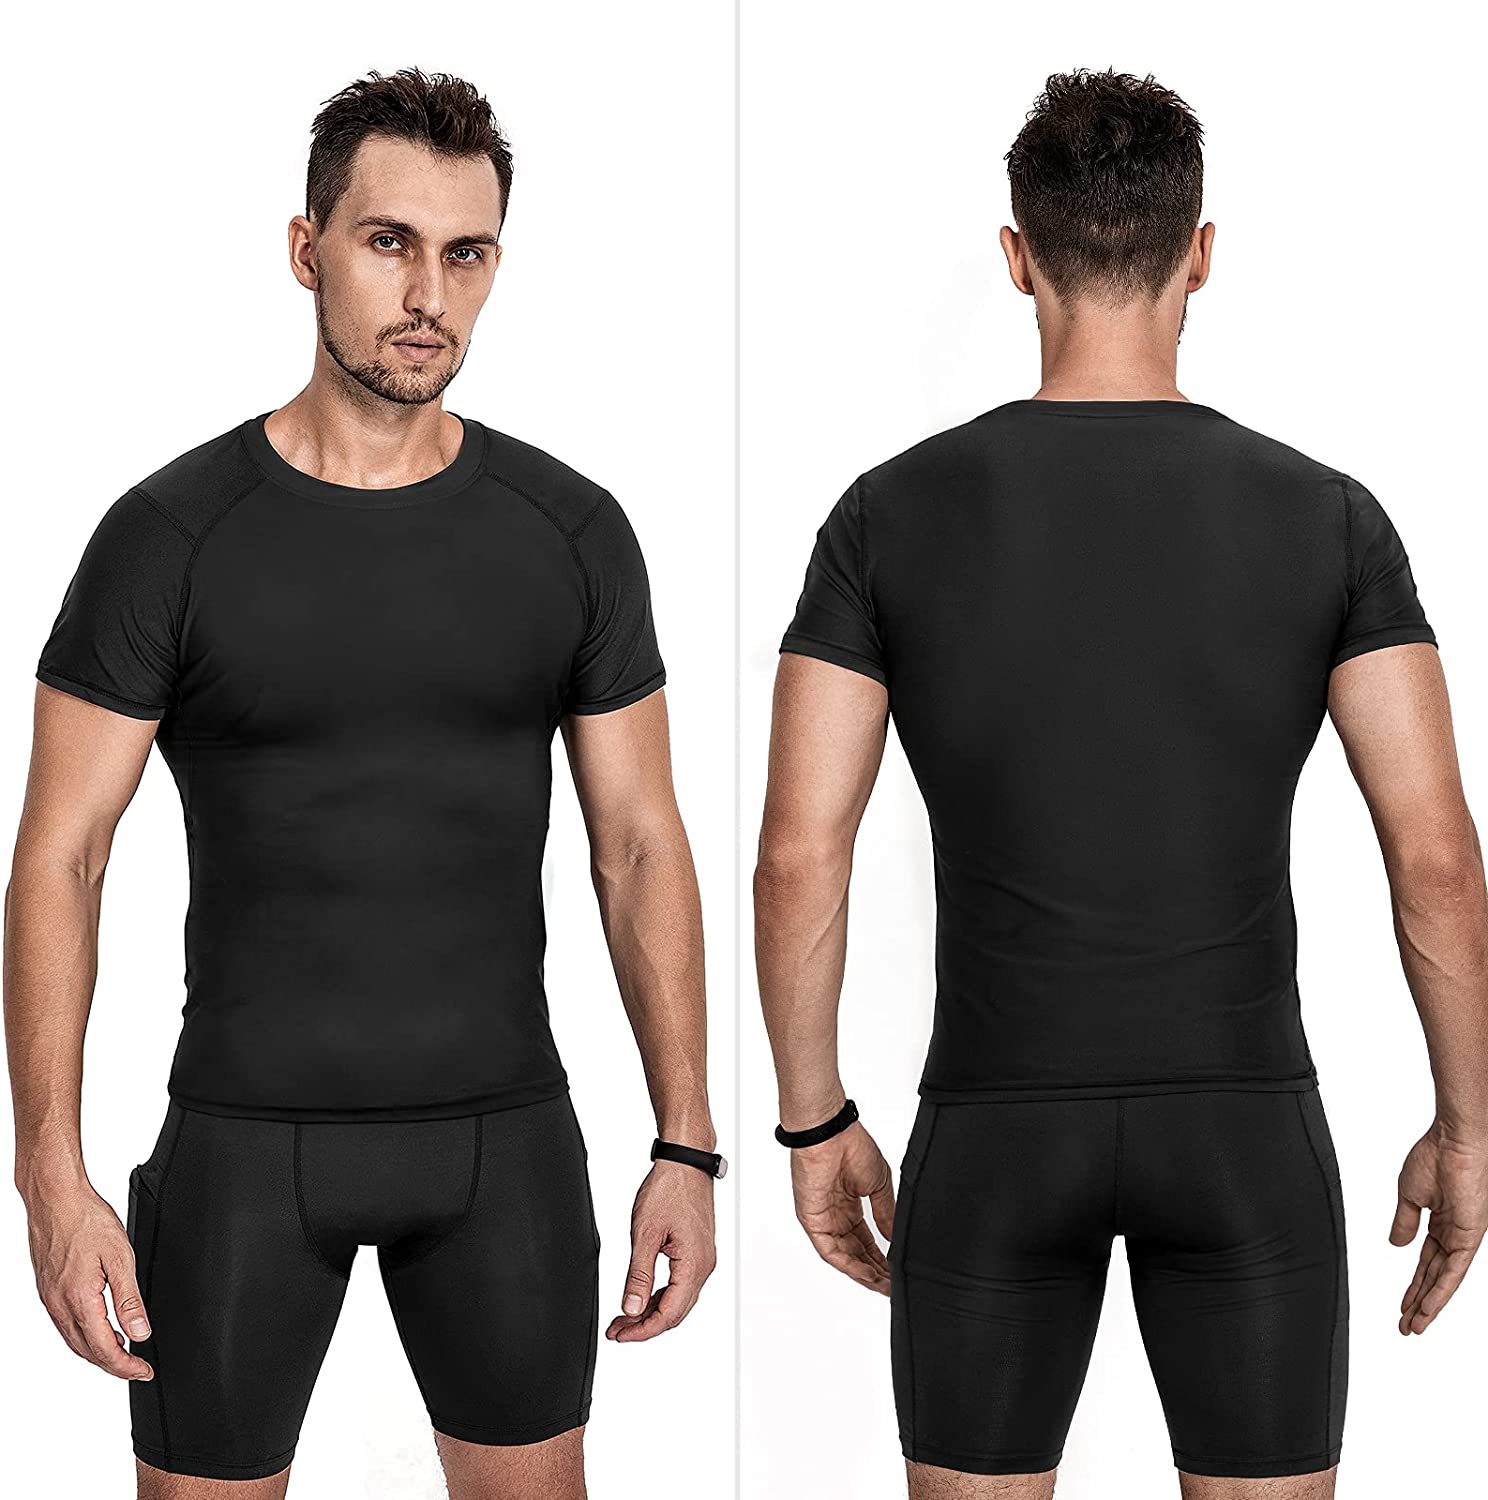 Niksa Cool Dry Compression Workout 3 Pack Shirts 02